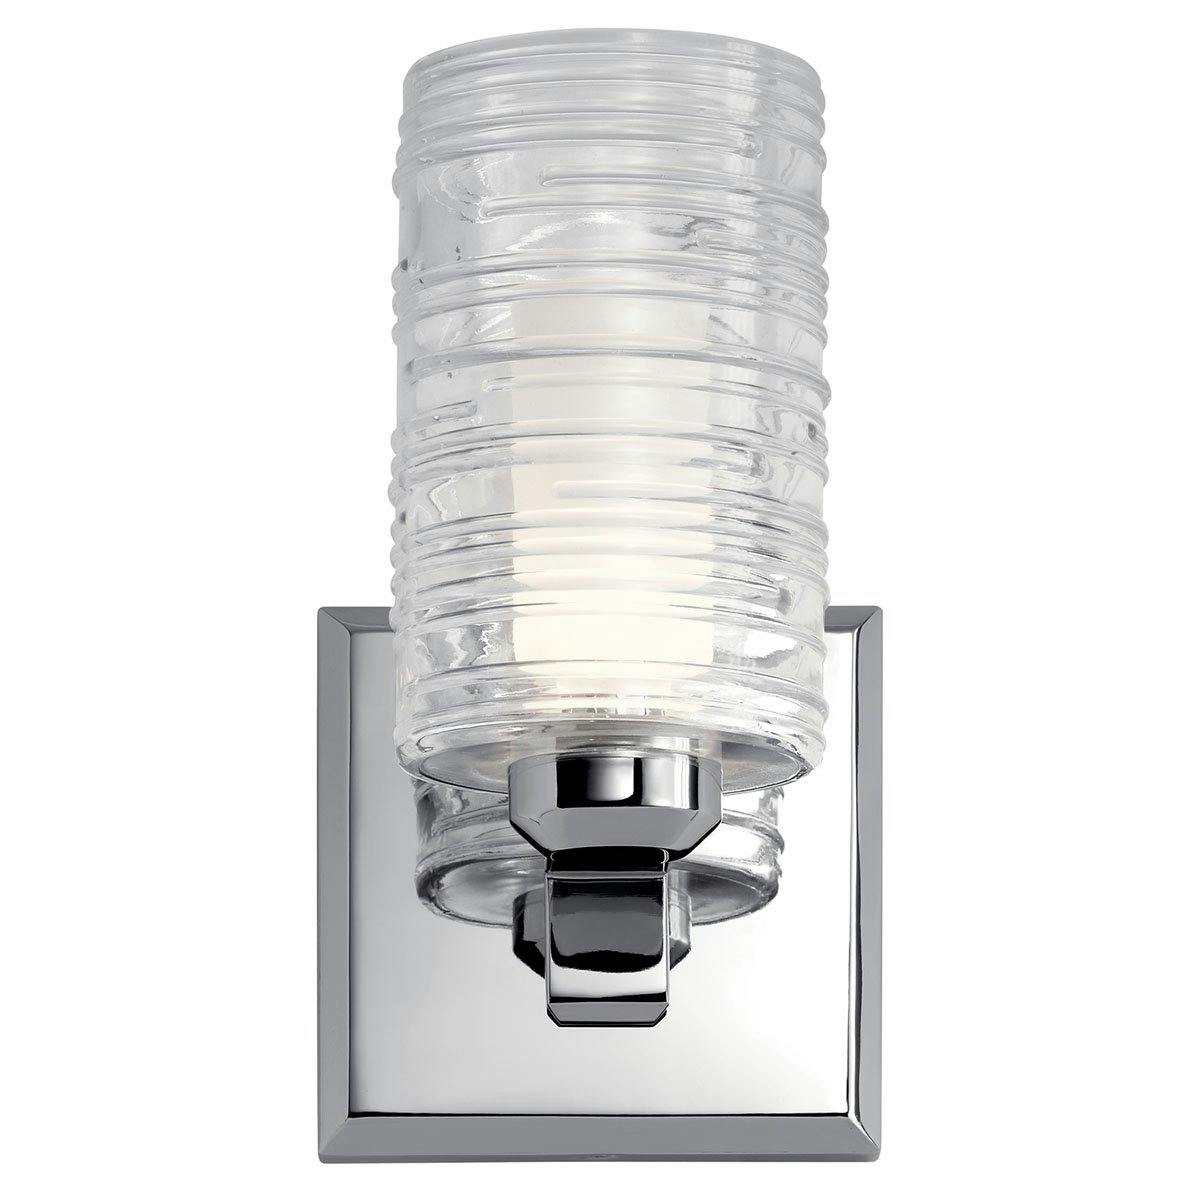 Front view of the Giarosa™ 10" 1 Light Wall Sconce Chrome on a white background